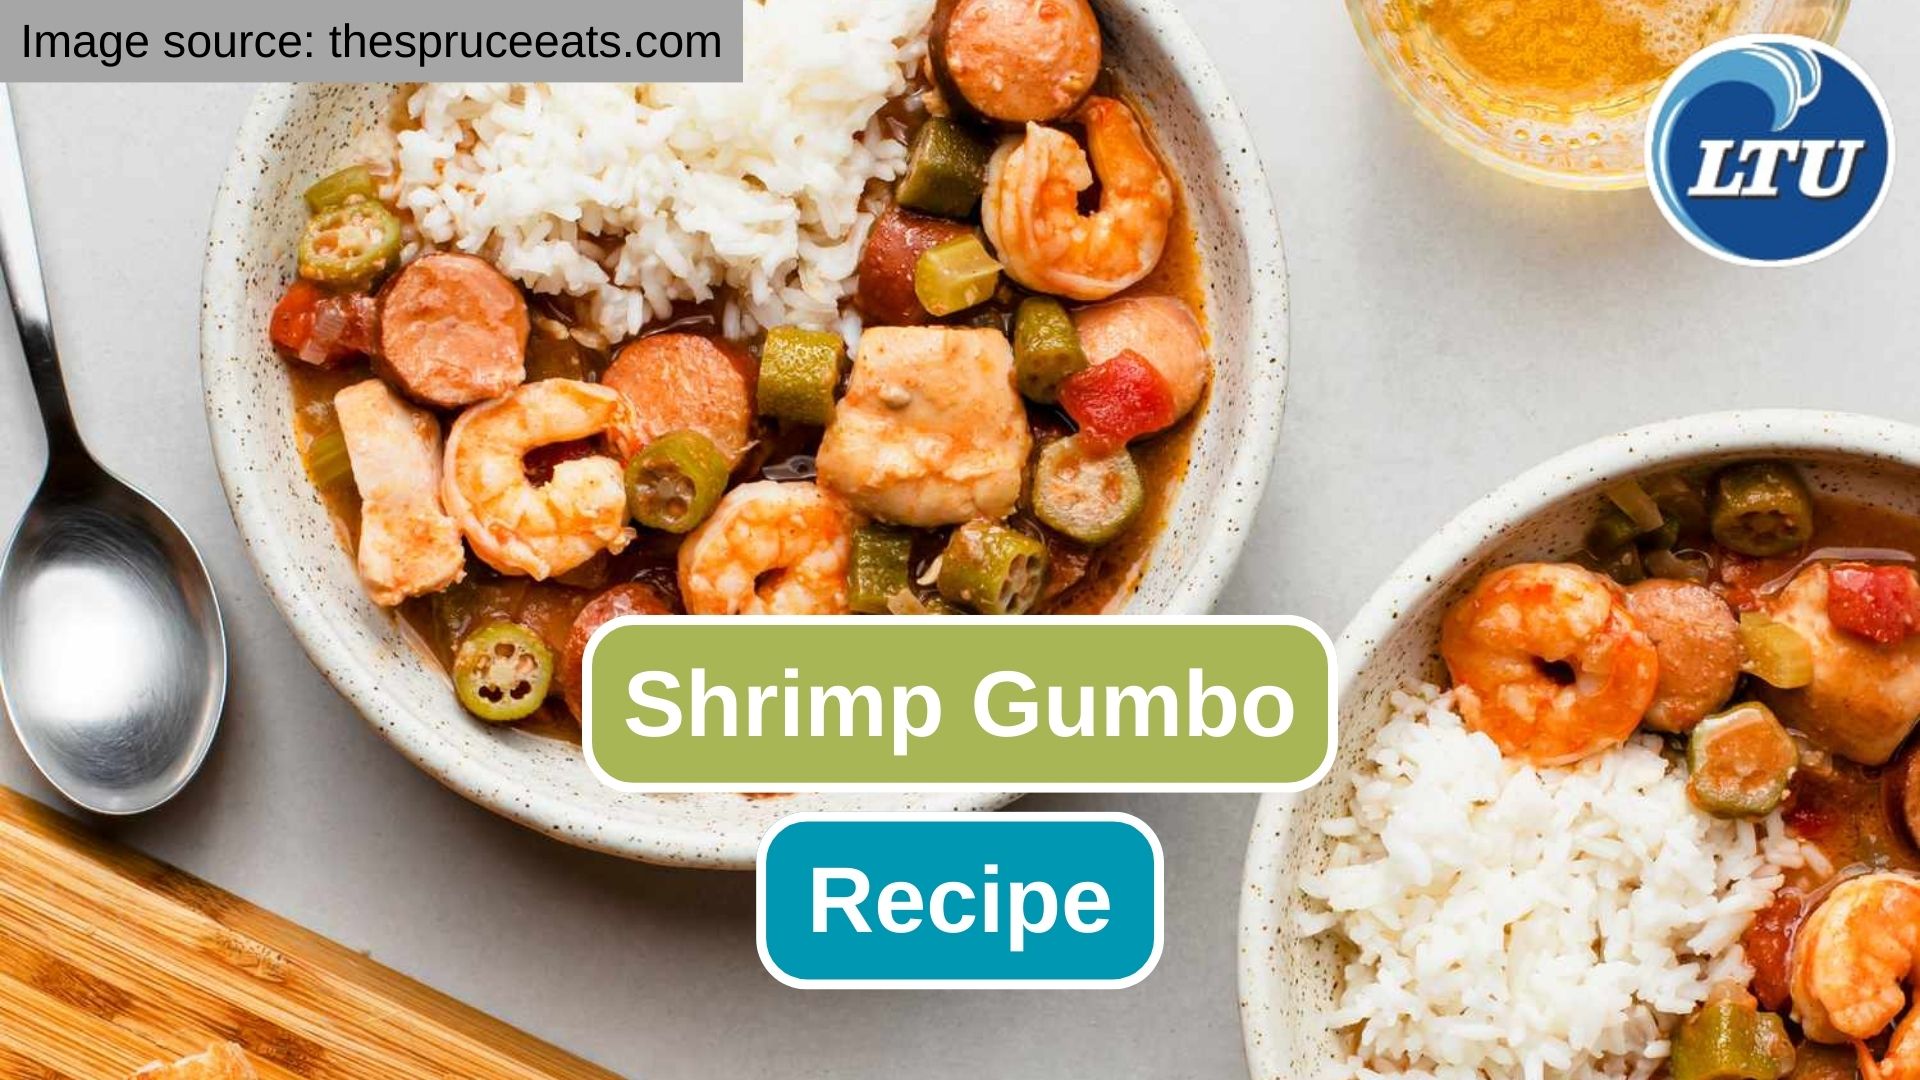 Delicious Shrimp Gumbo Recipe to Try at Home